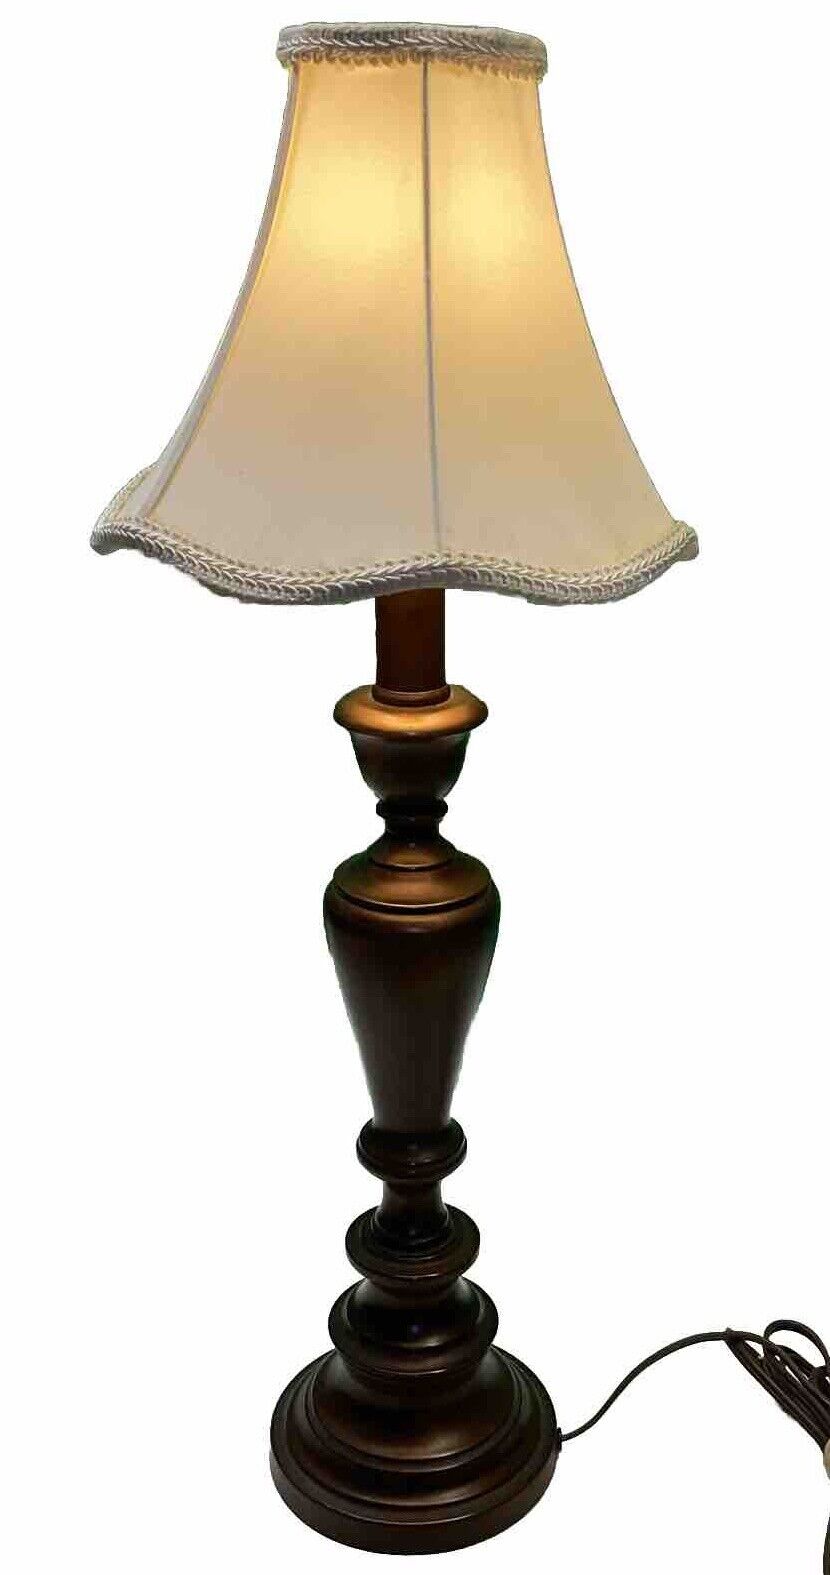 VTG Quoizel INC -Wooden Column Table Lamp With Shade 27” Tall, Brown Color